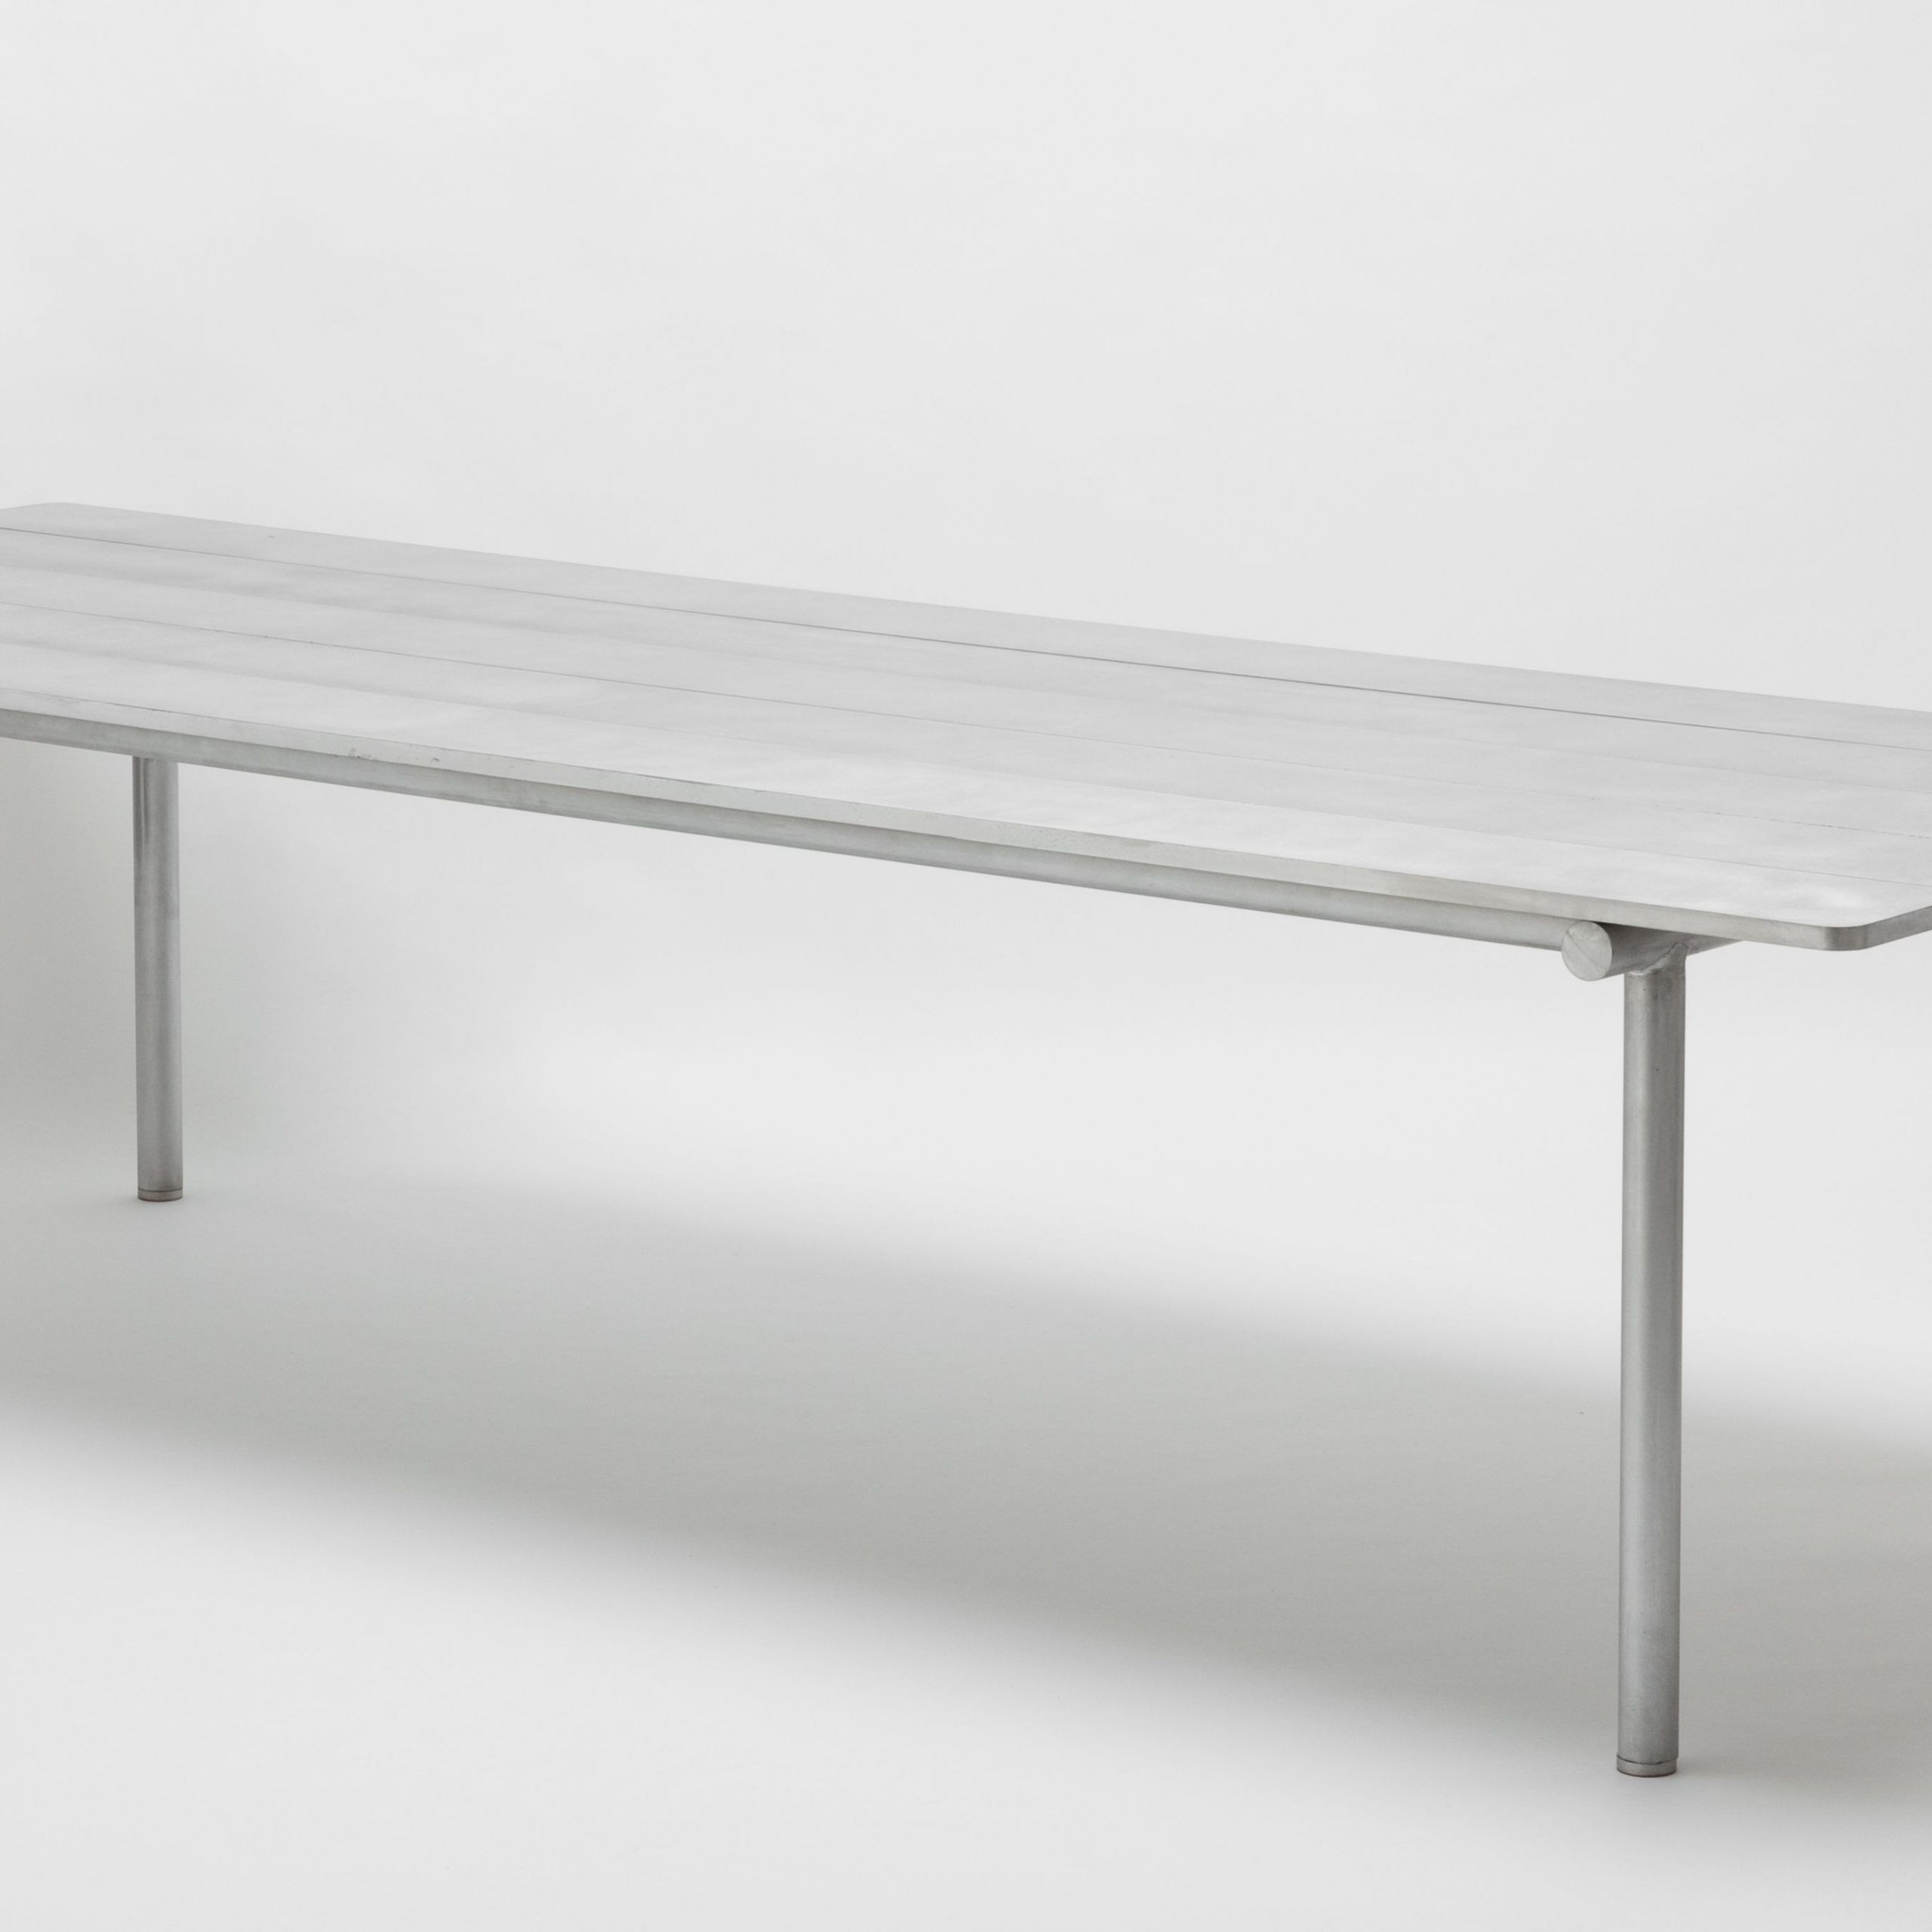 Faye Toogood – Plank Table | Tables | Plank Table, Table, Plank With Regard To Recent Faye Dining Tables (View 15 of 25)